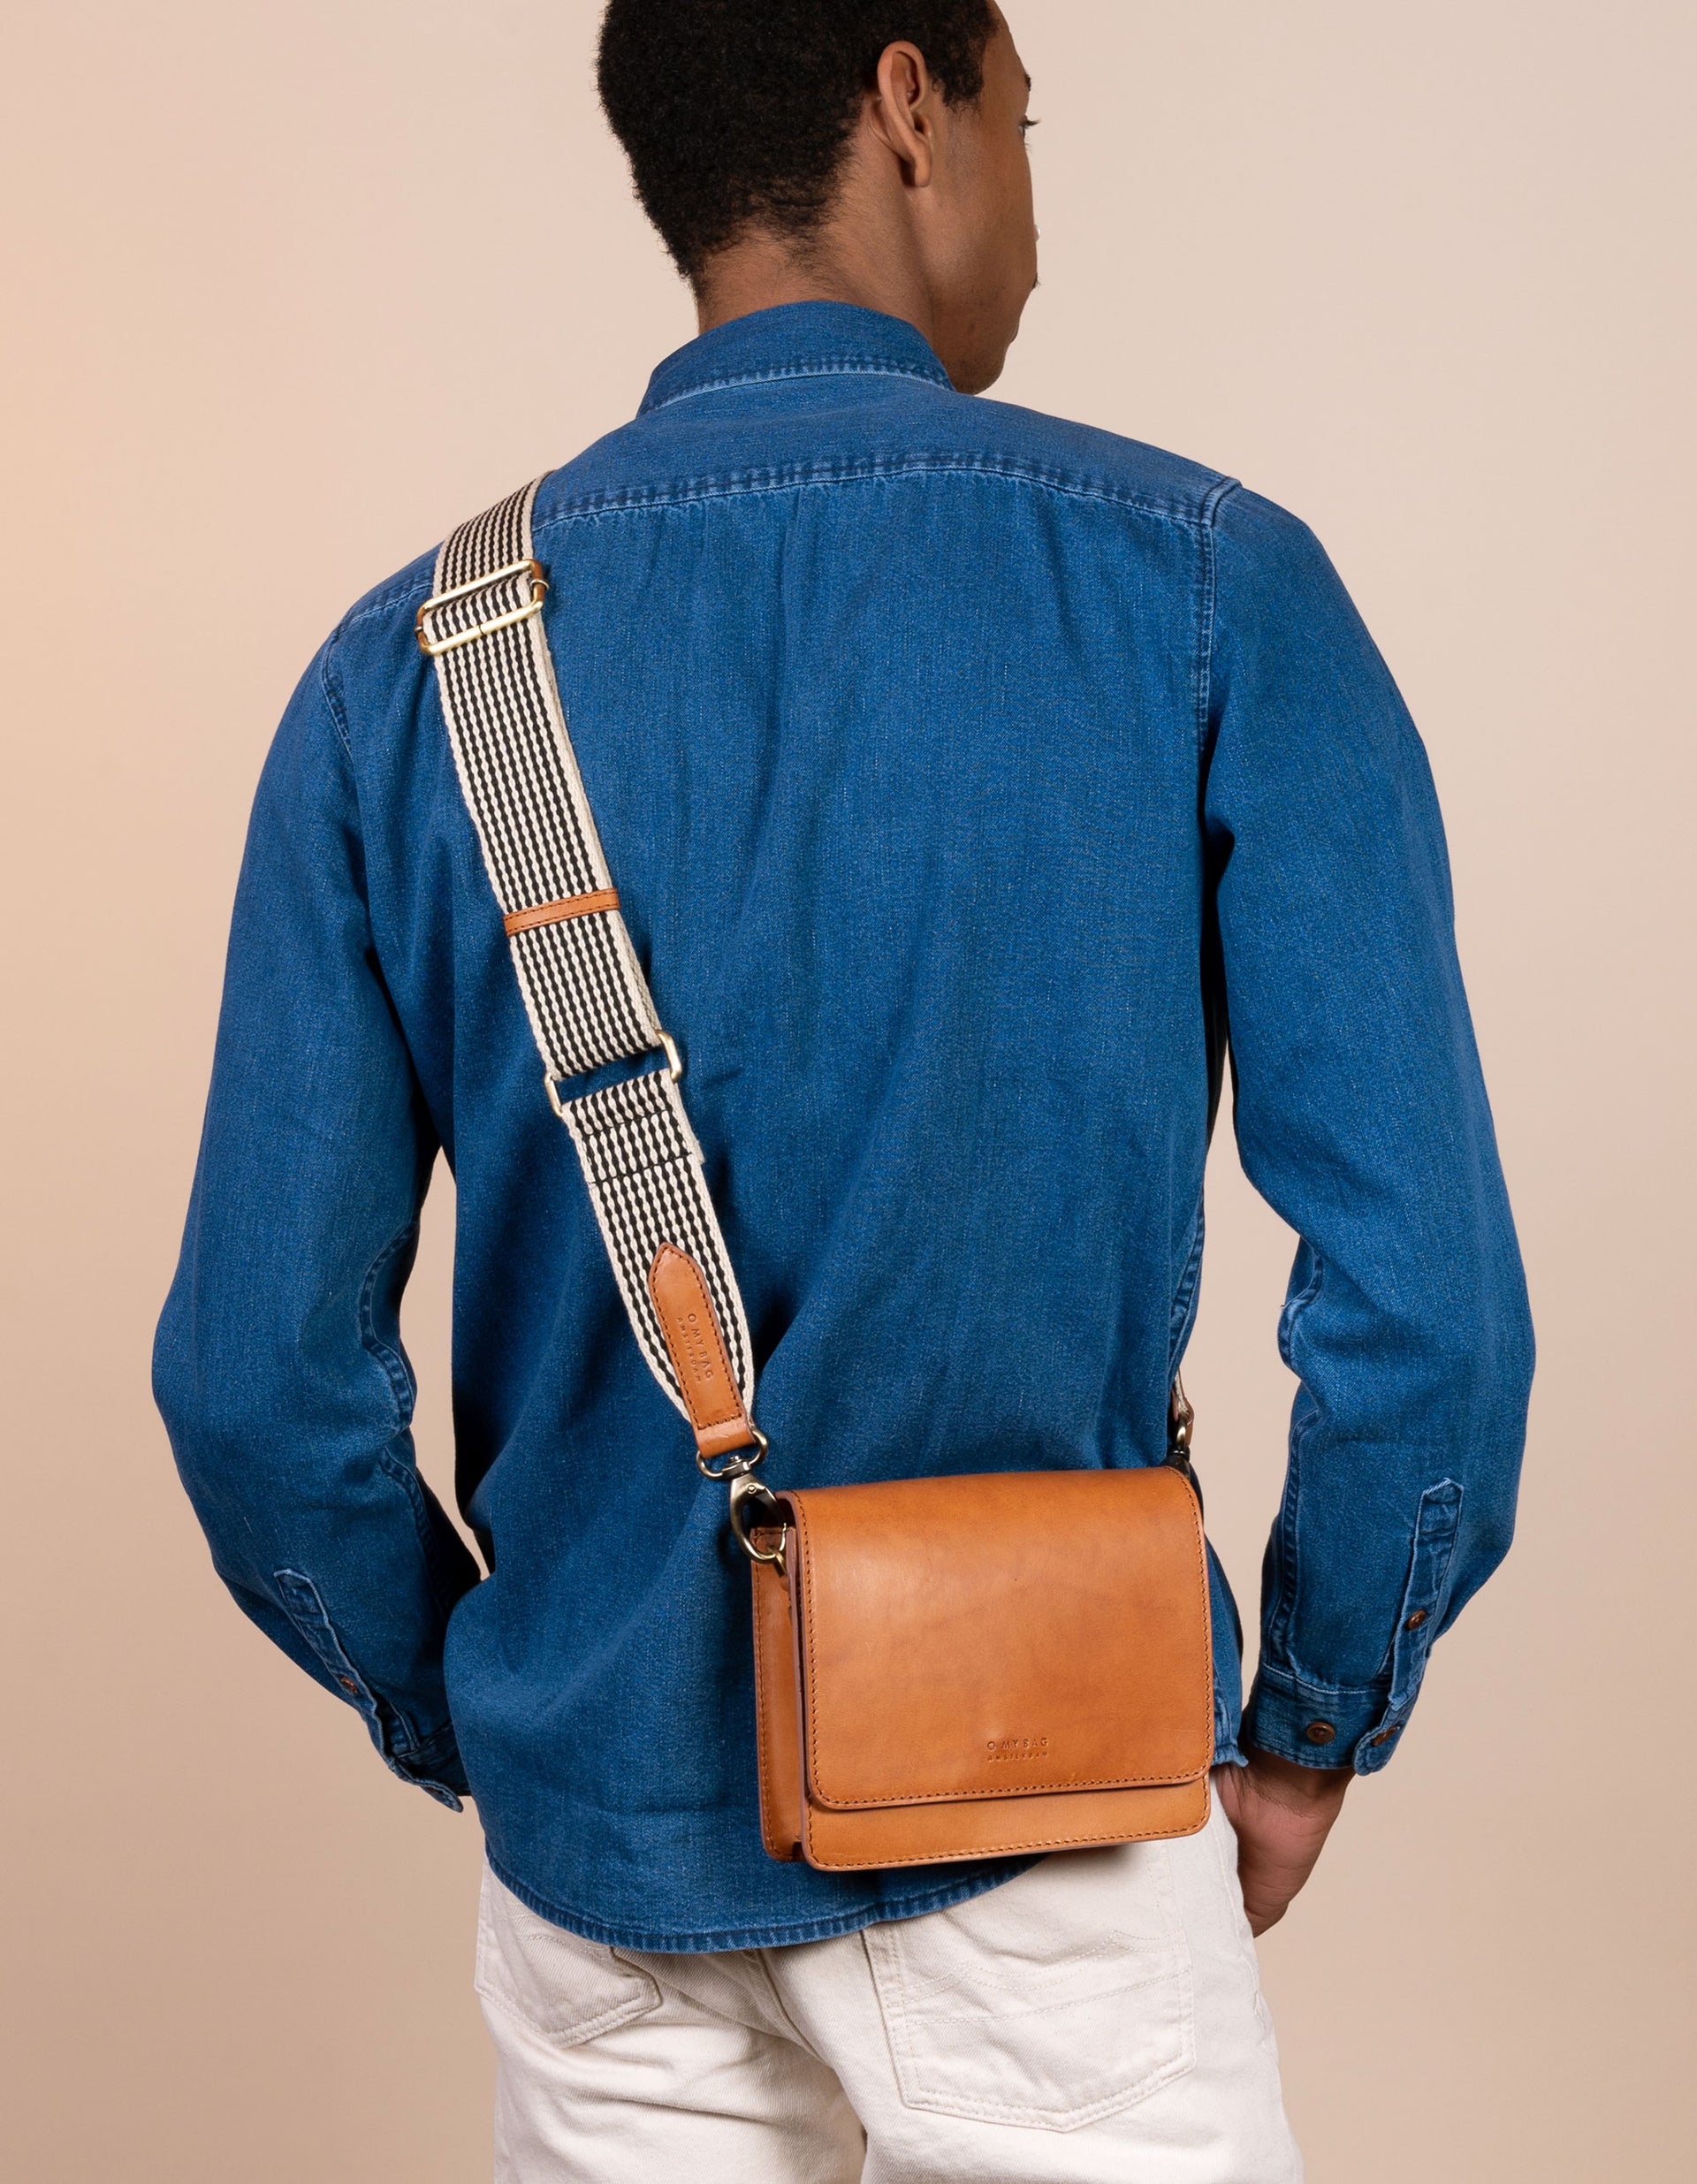 Audrey Mini Cognac leather bag. Square shape with an adjustable webbing strap. Male Model image. Back view